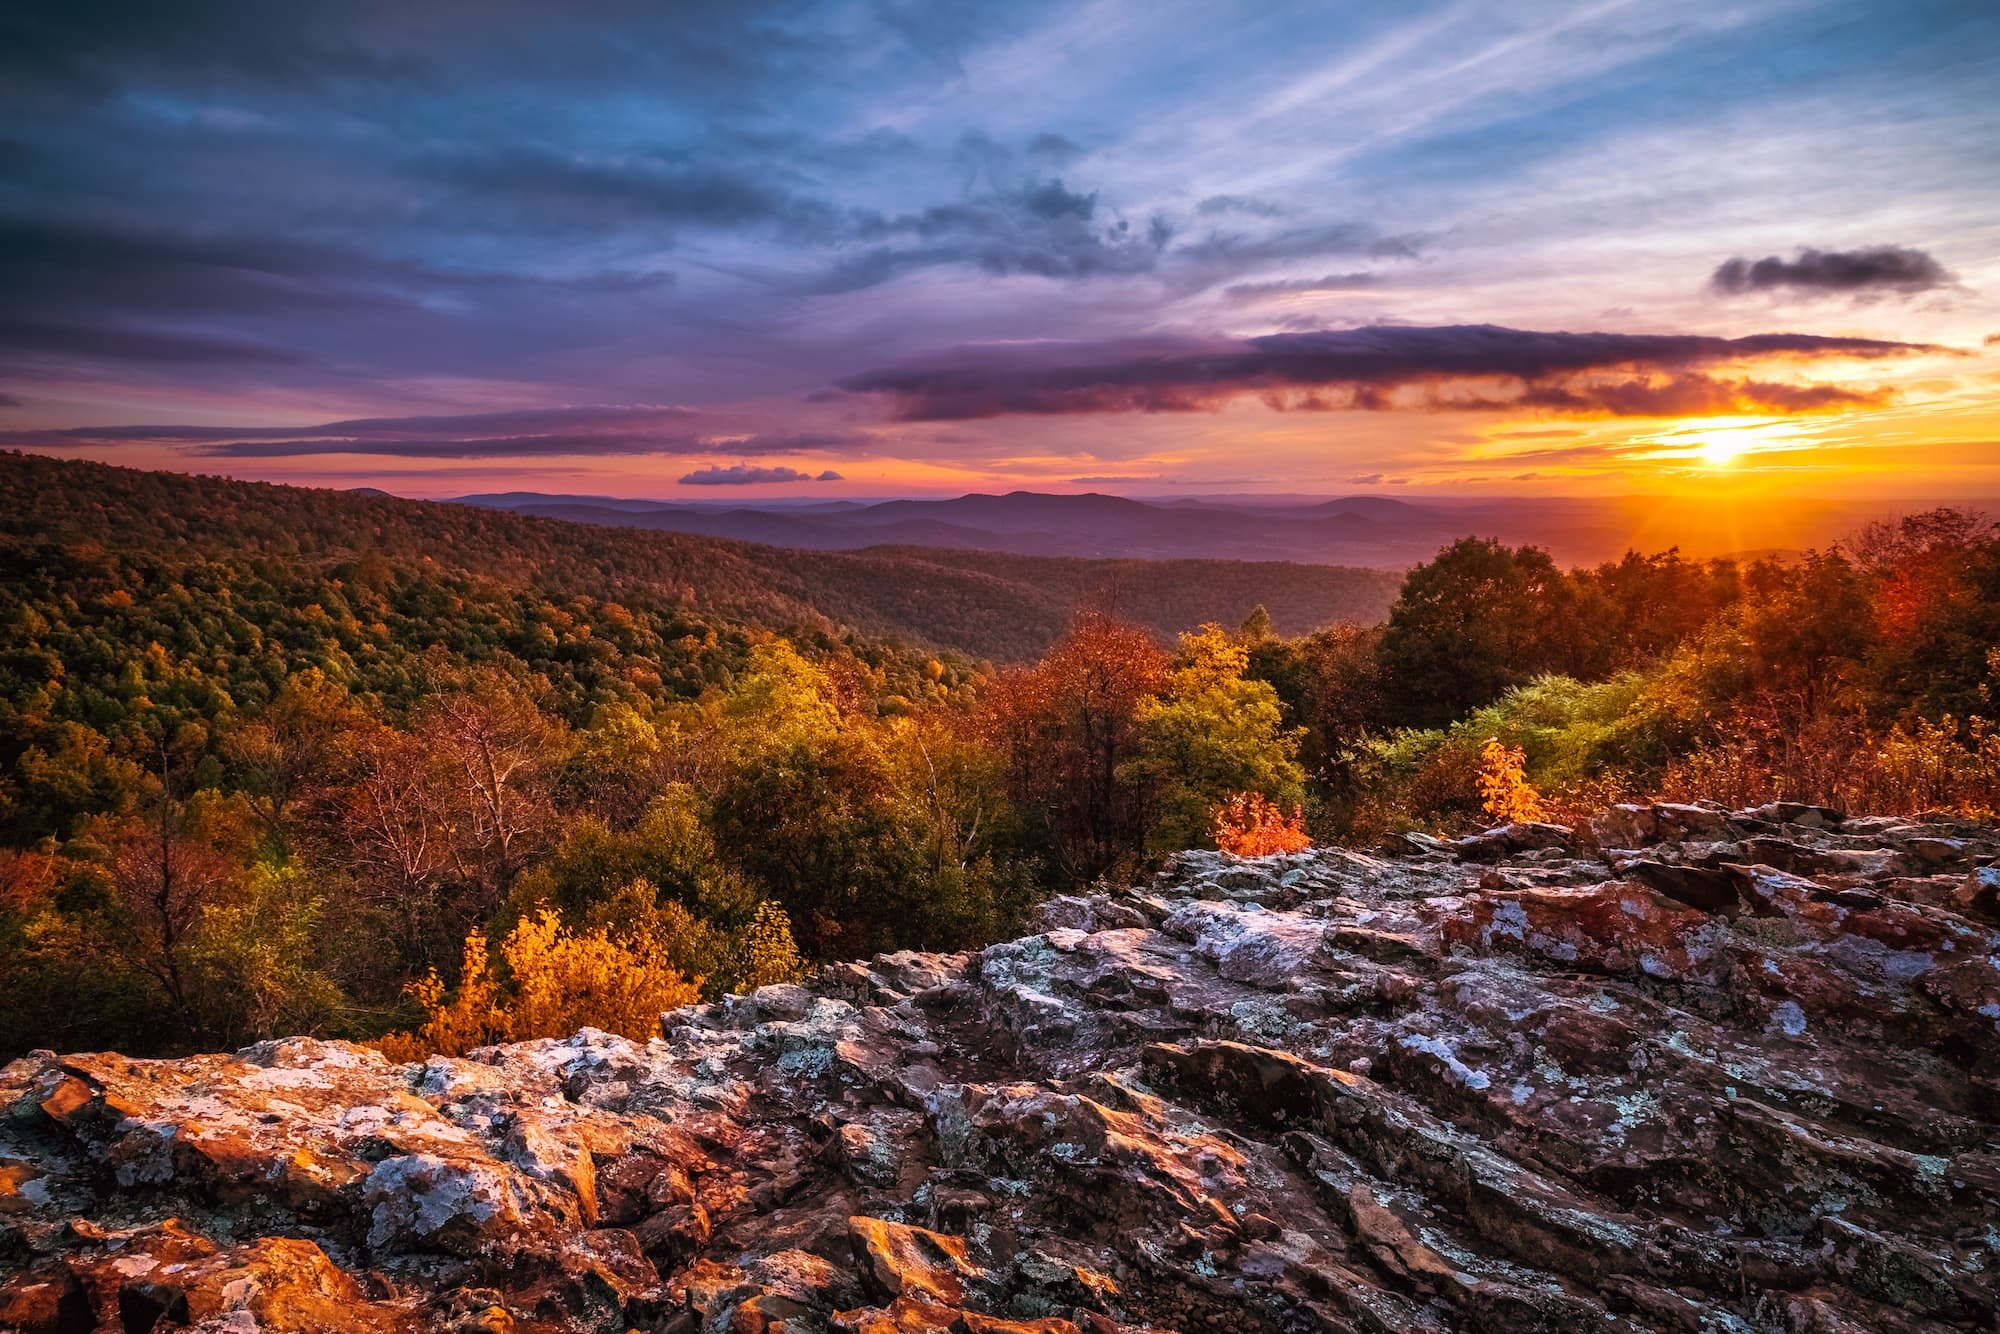 Shenendoah National Park // Discover the best National Parks to visit during fall for fall colors and foliage. Get tips on hikes, scenic drives, and more.